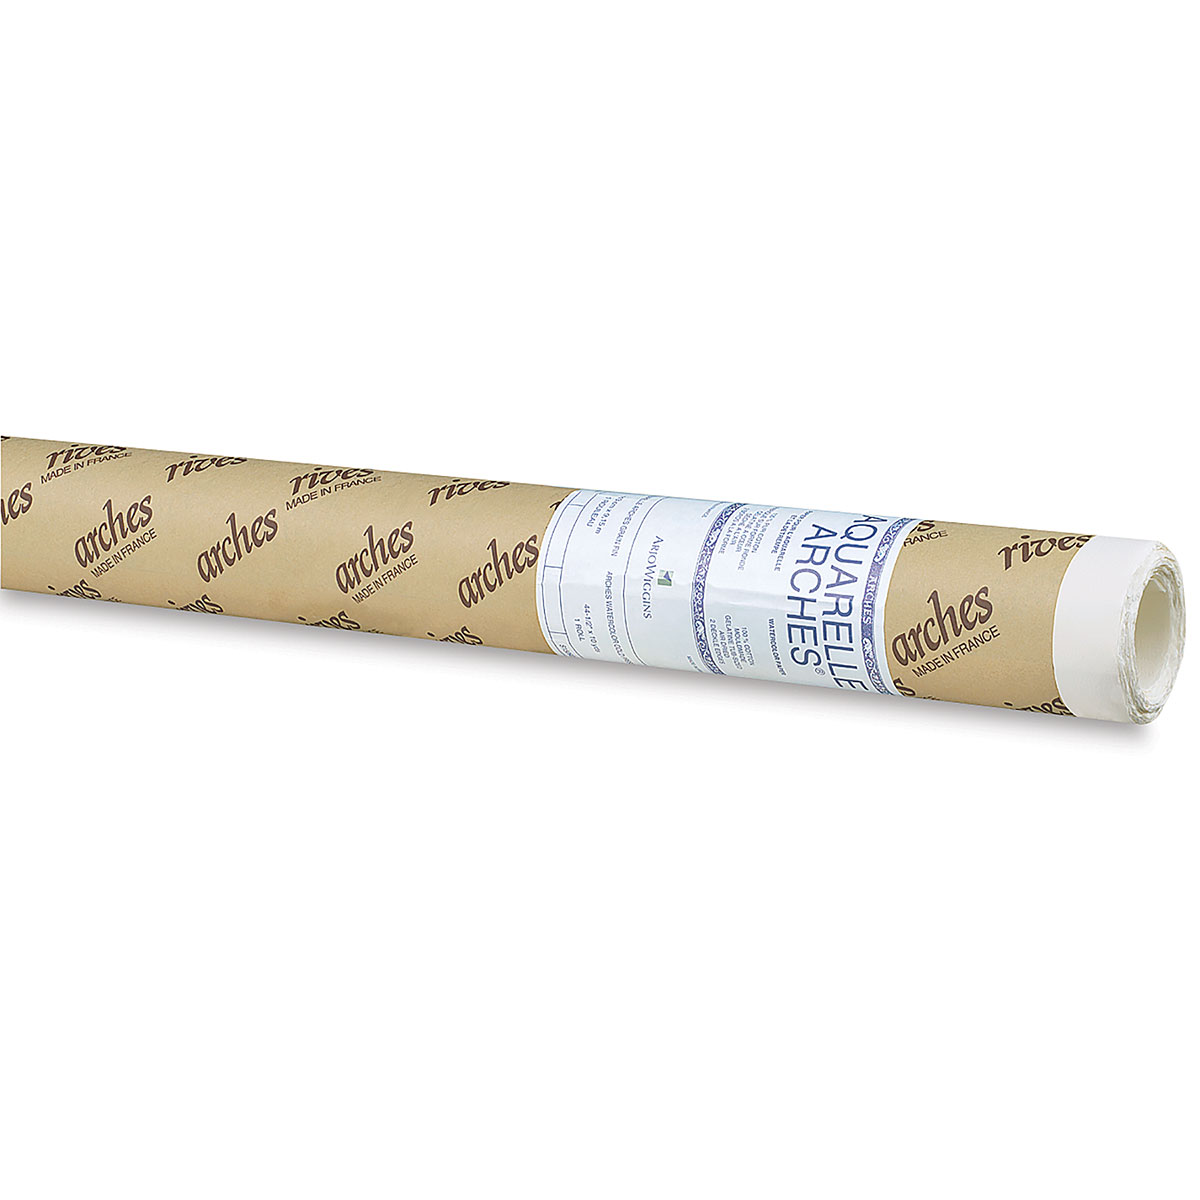 Arches Natural White Watercolor Paper - Hot Press, 44-1/2 x 10 yds, Roll